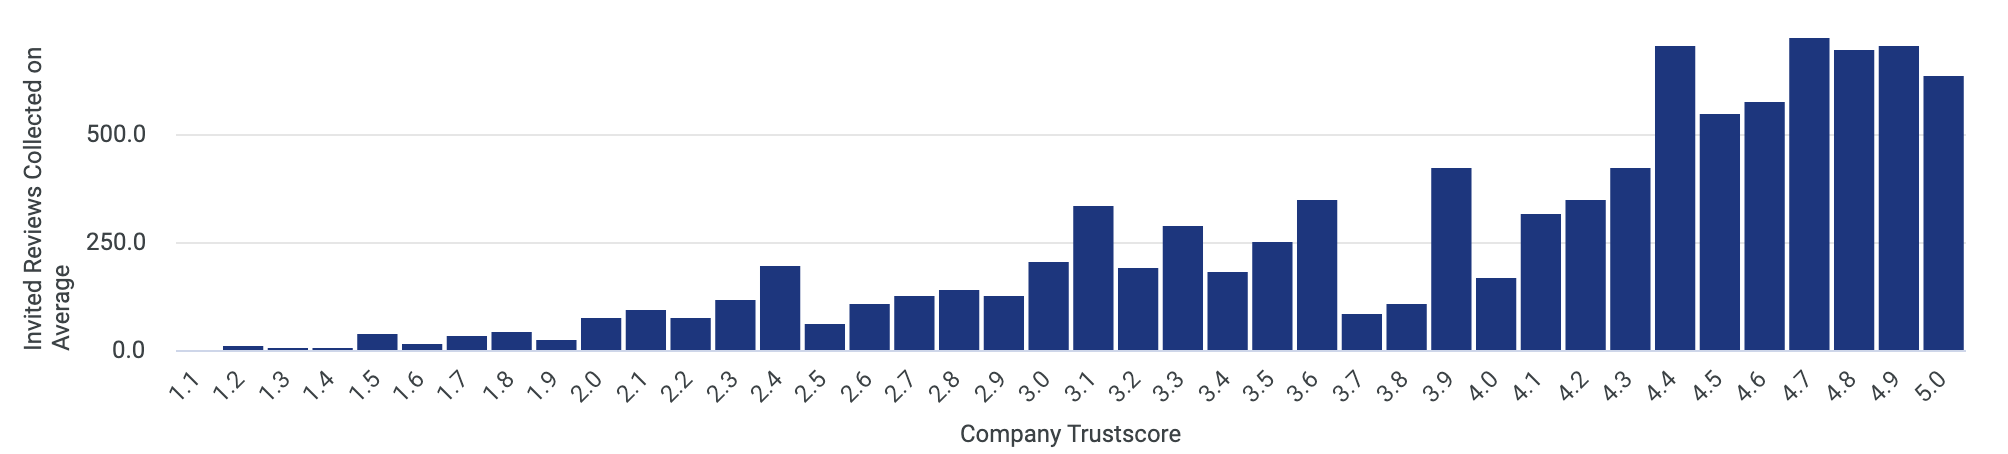 Reviews collected and TrustScore